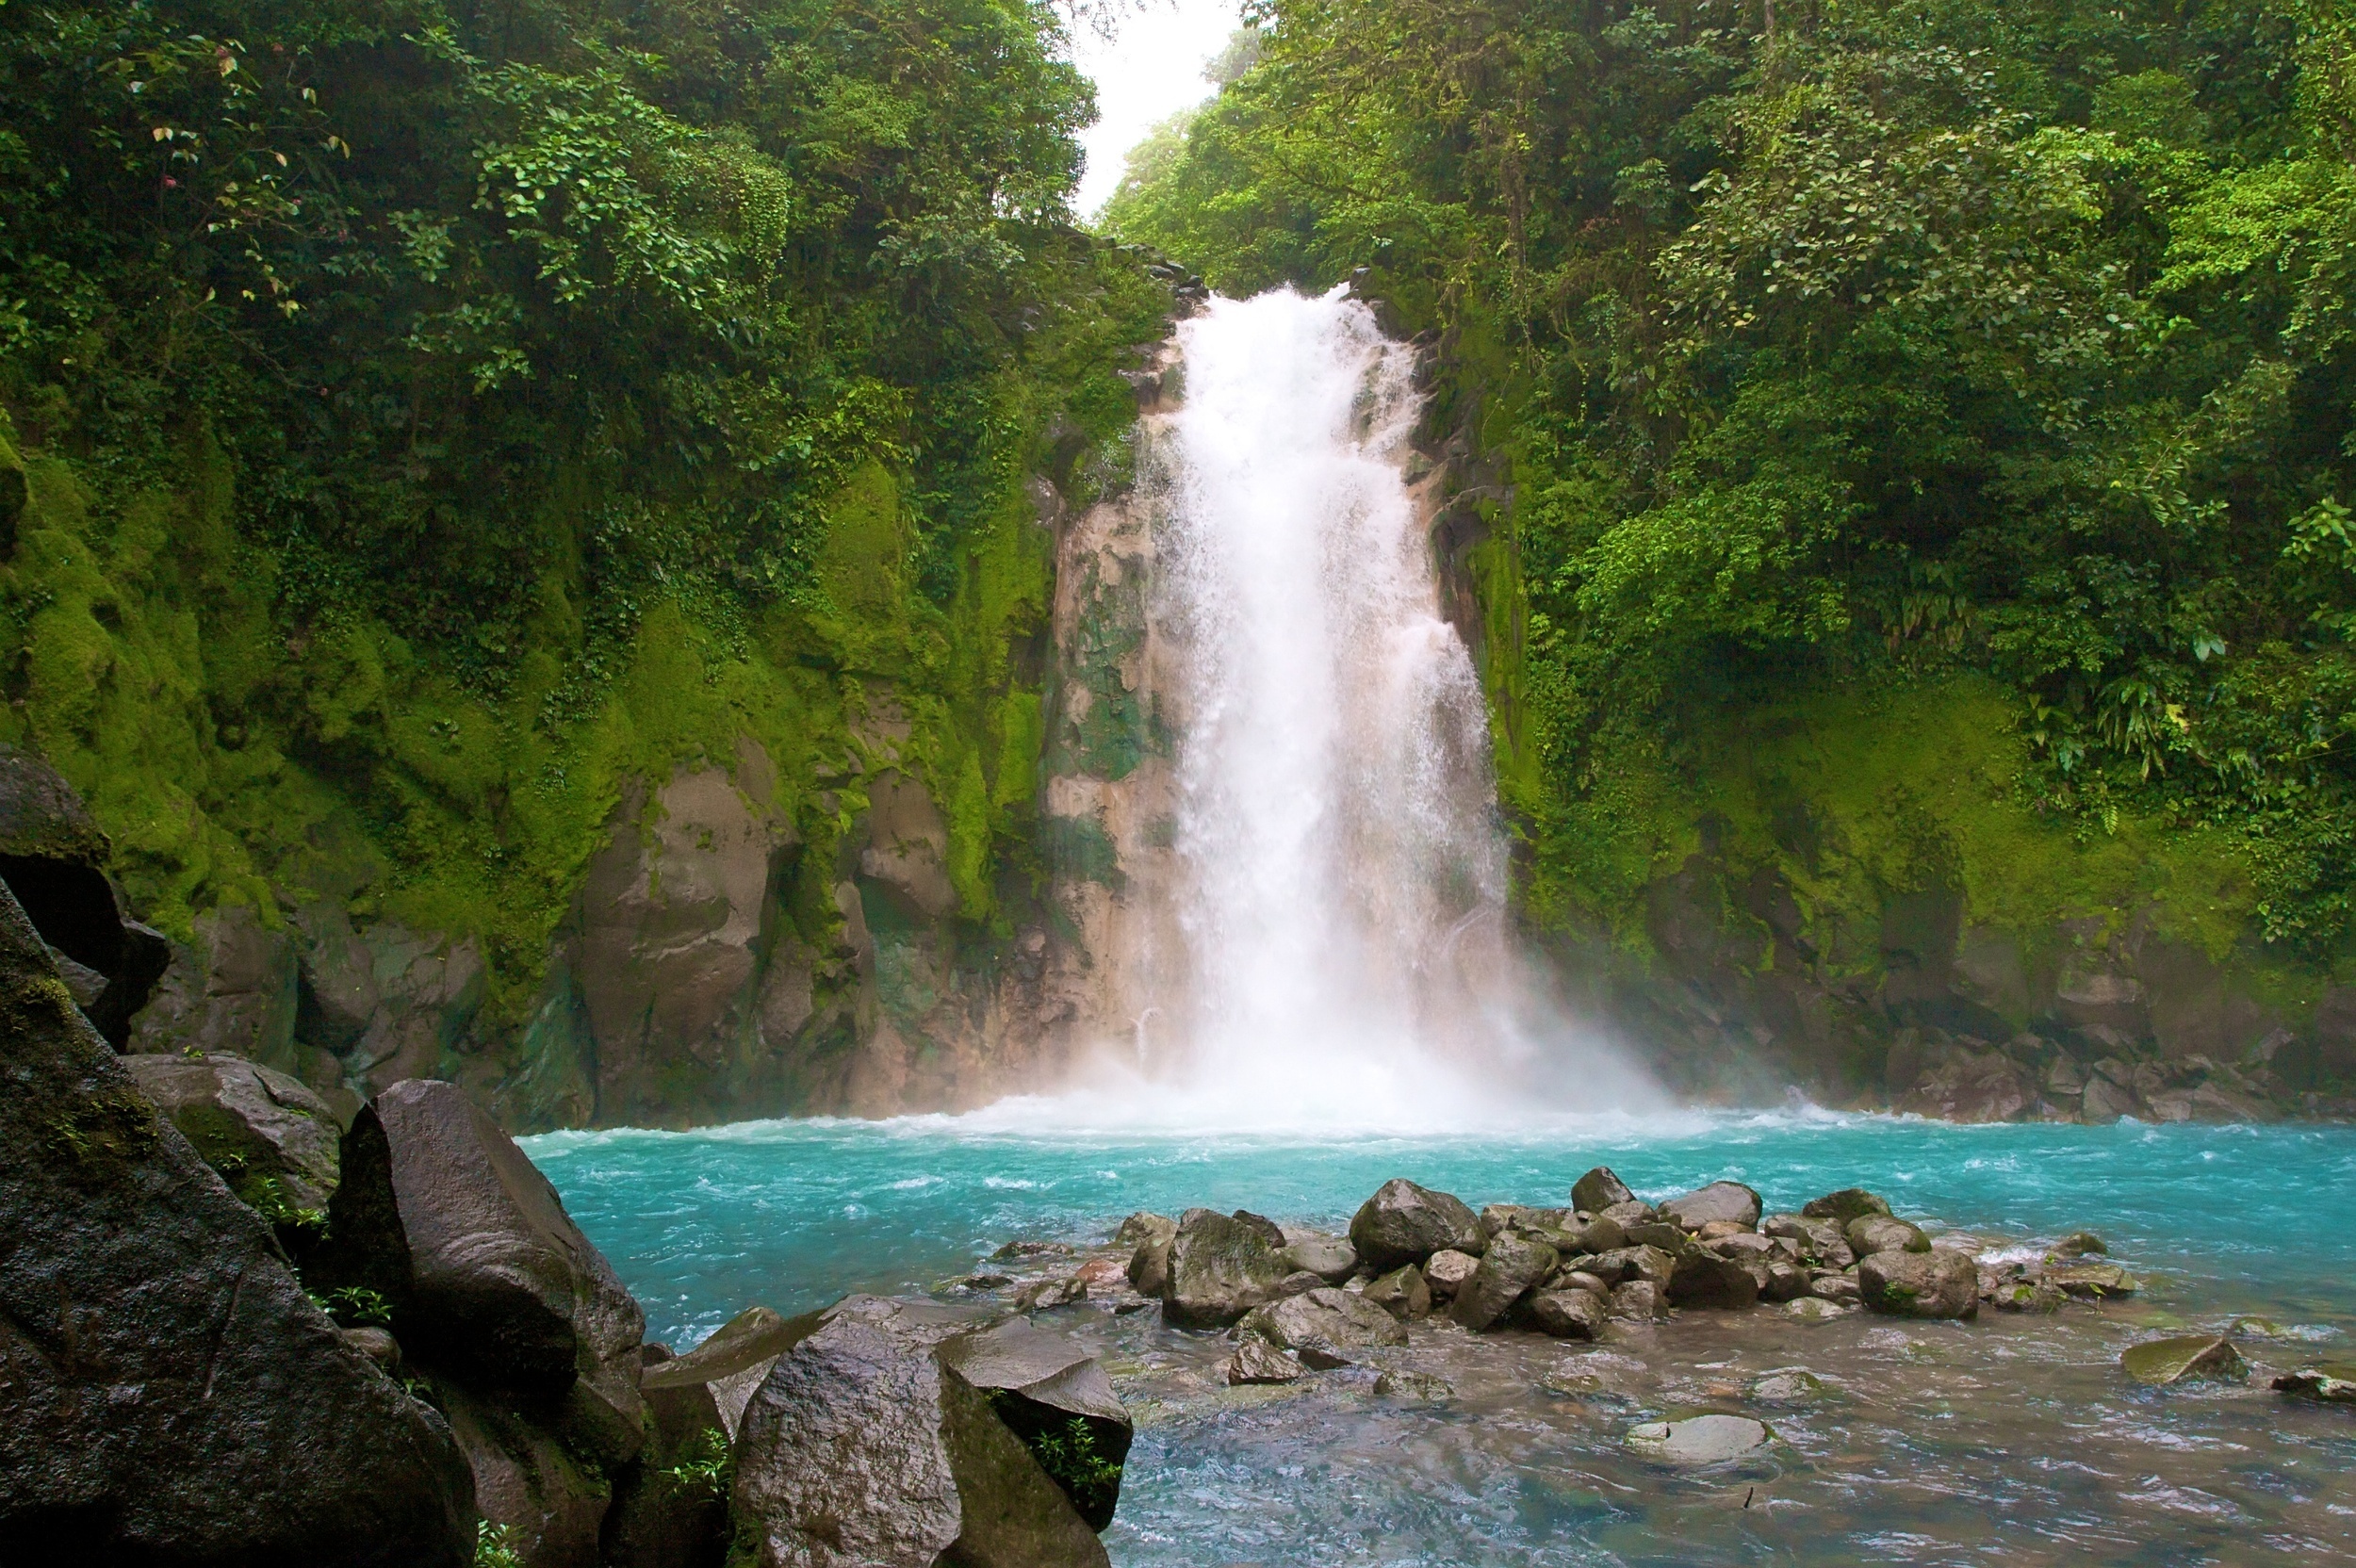 <p>Costa Rica is known for its nice weather year-round, but if you’re looking for something a bit different, check out La Fortuna. The town is the gateway to the nearby volcanic national park and is perfect for outdoors travelers looking for somewhere warm to hike, climb, and swim in winter.</p><p><a href='https://www.msn.com/en-us/community/channel/vid-cj9pqbr0vn9in2b6ddcd8sfgpfq6x6utp44fssrv6mc2gtybw0us'>Follow us on MSN to see more of our exclusive lifestyle content.</a></p>